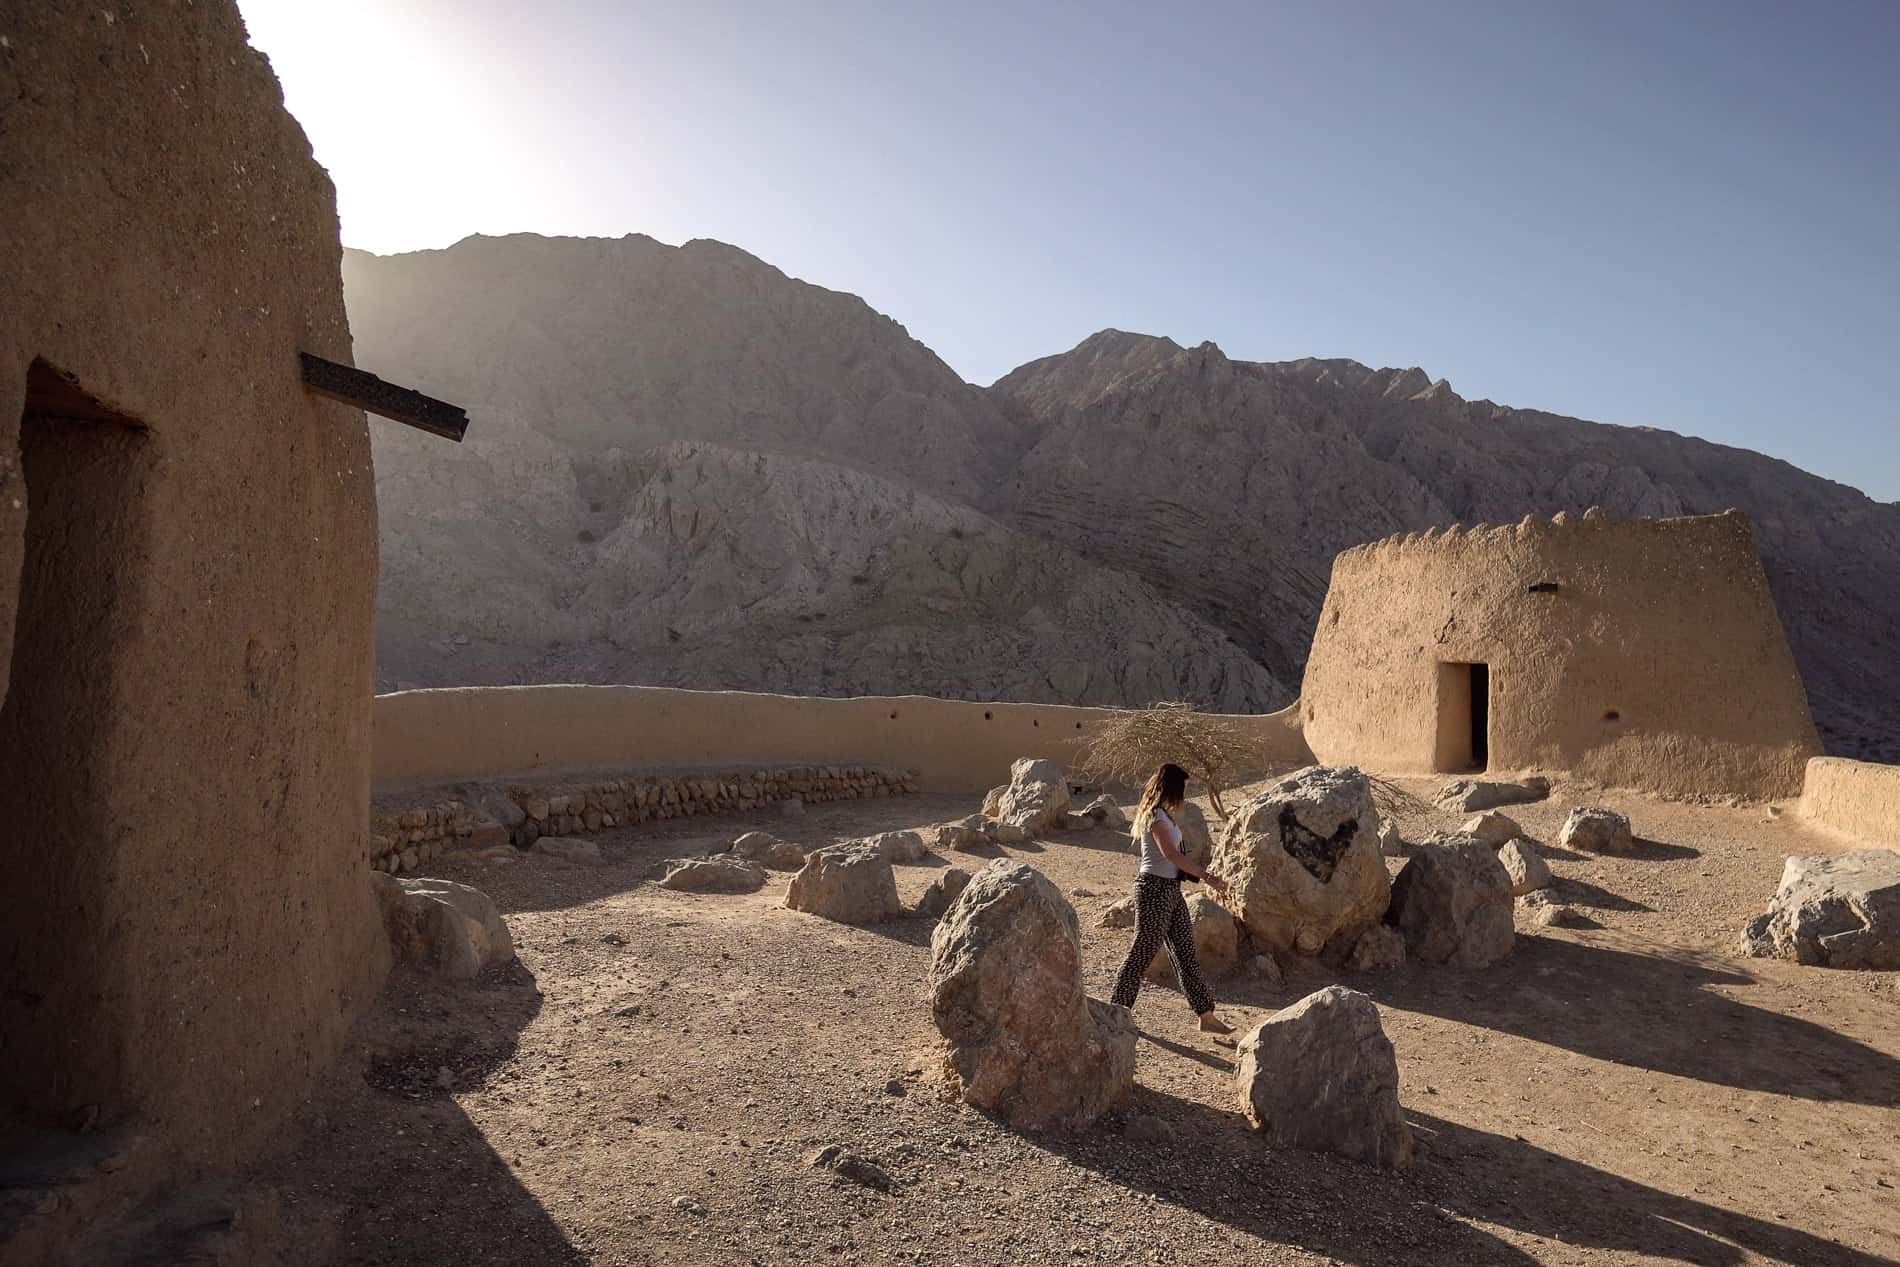 A woman walks within the twin turrets and wall fortifications of Dhayah Fort in the mountain backed desert landscape of Ras Al Khaimah.